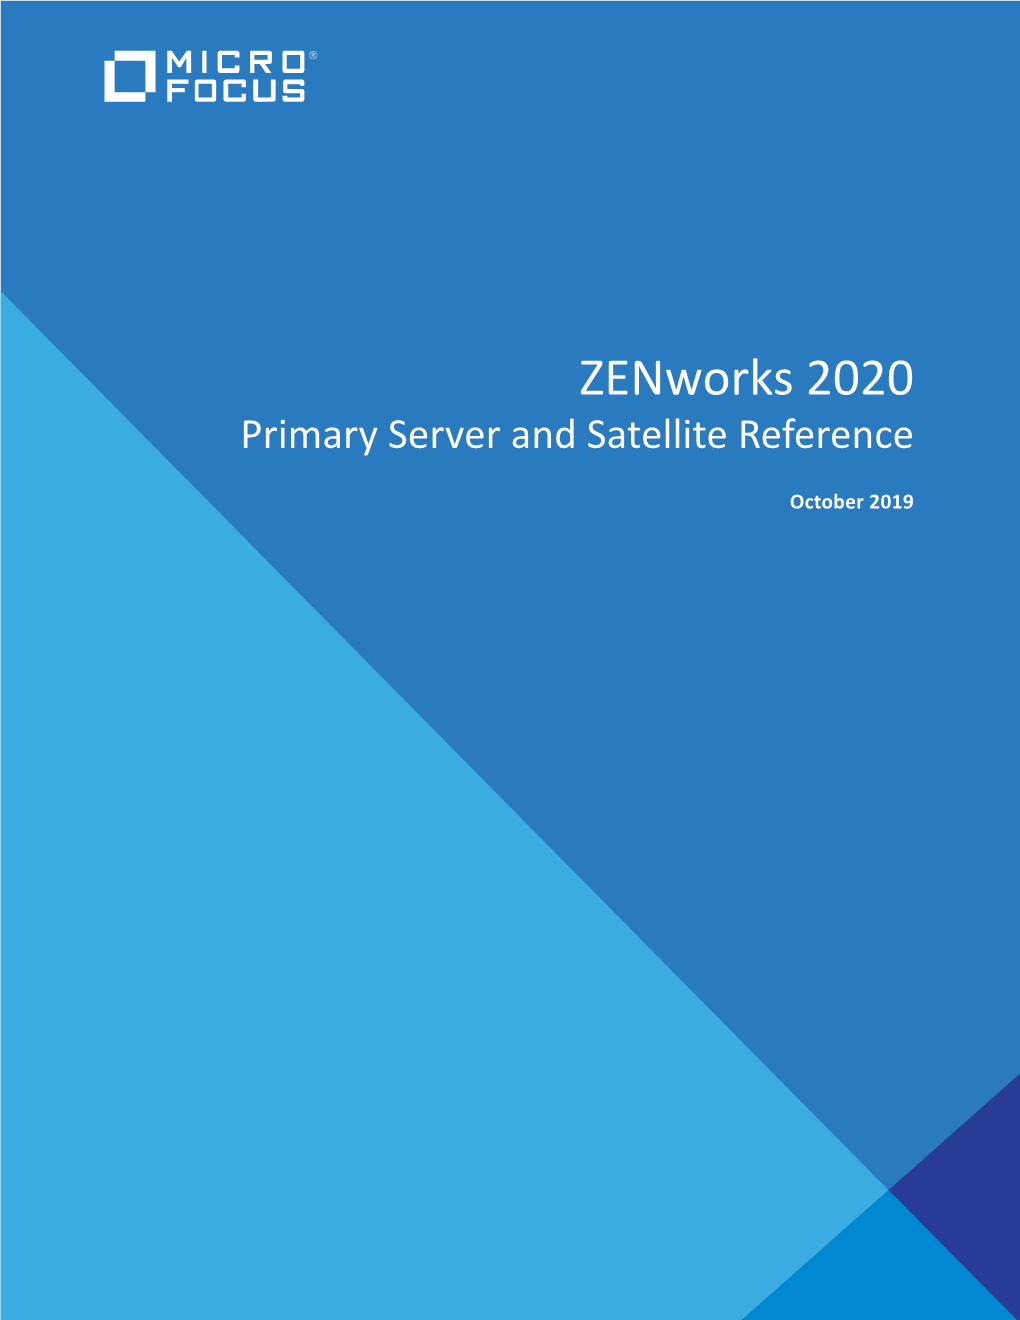 Zenworks Primary Server and Satellite Reference Provides Information About Managing Zenworks Primary Servers and Configuring Devices to Function As Satellites